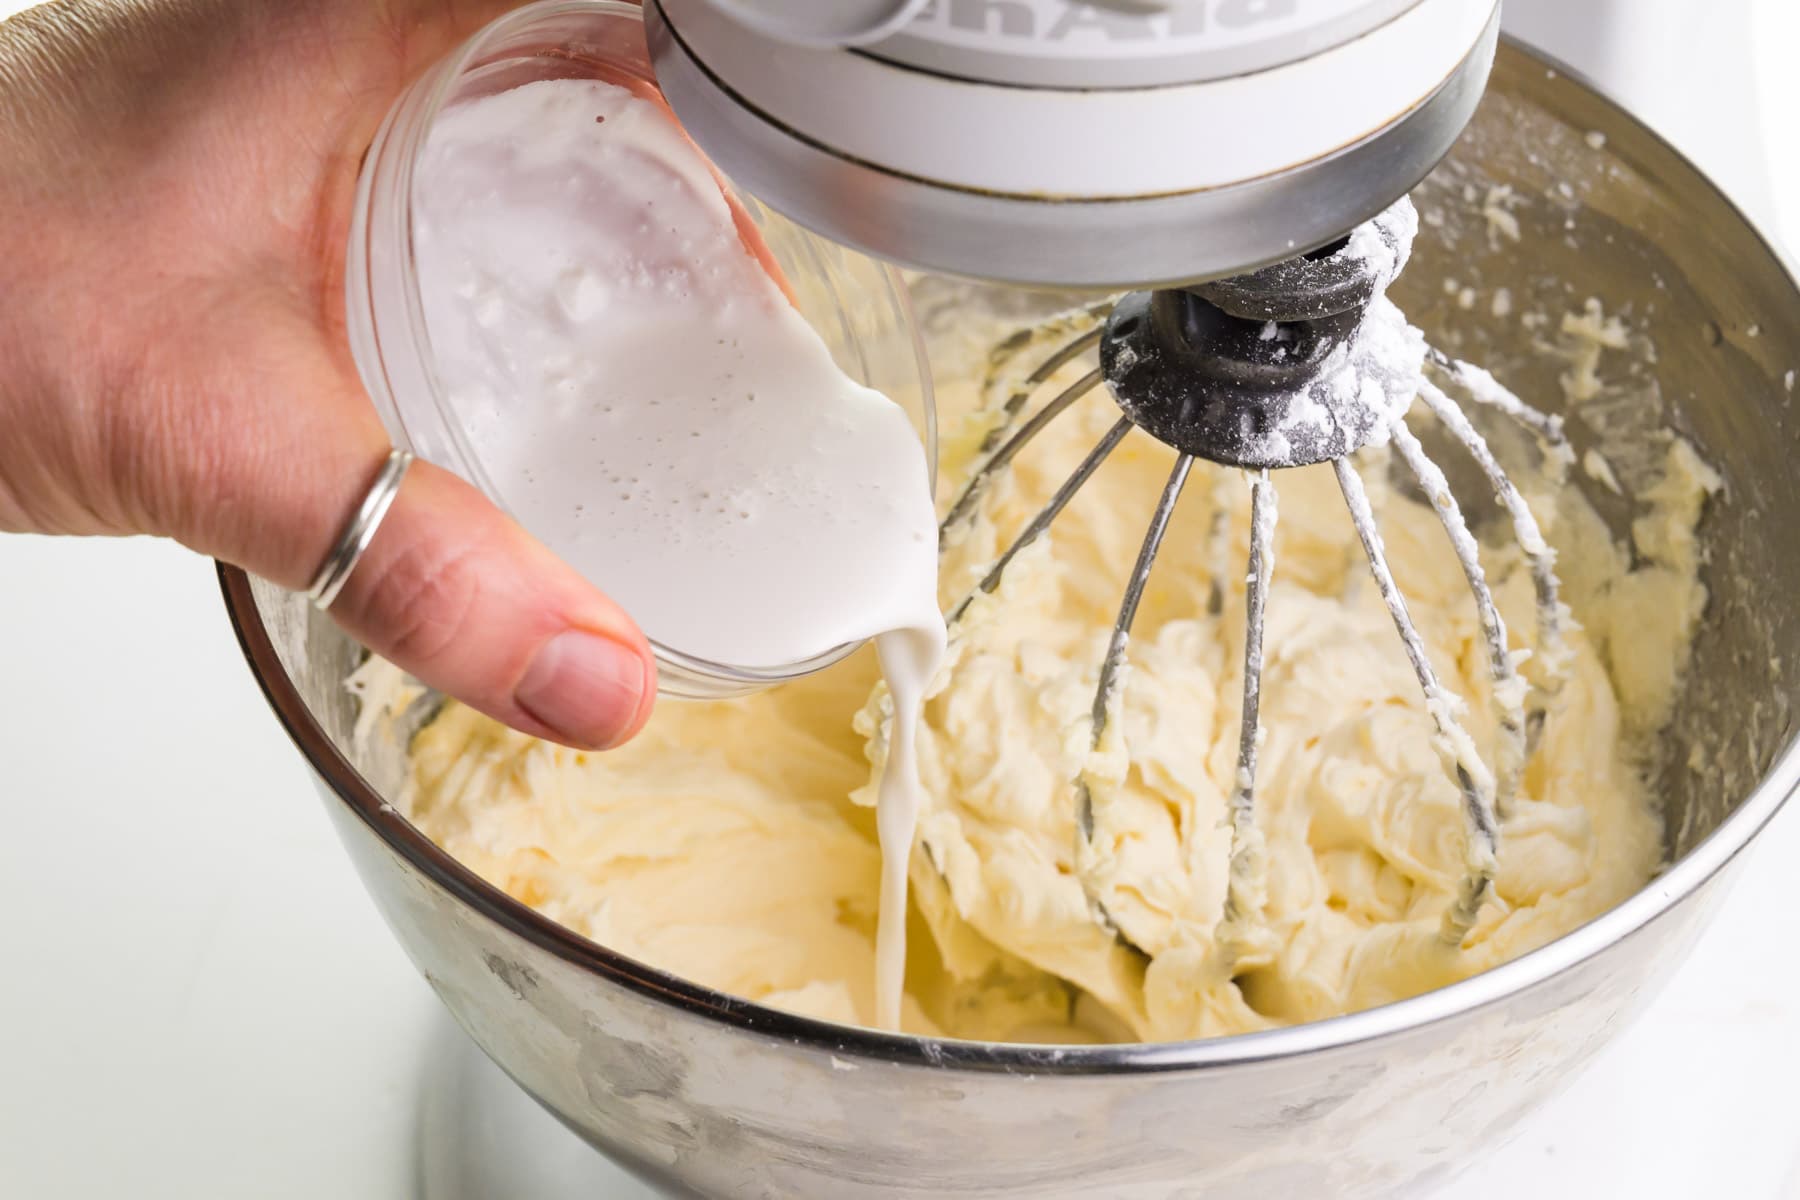 A hand holds a bowl of vegan creamer, pouring it into a stand mixer with vegan lemon frosting.